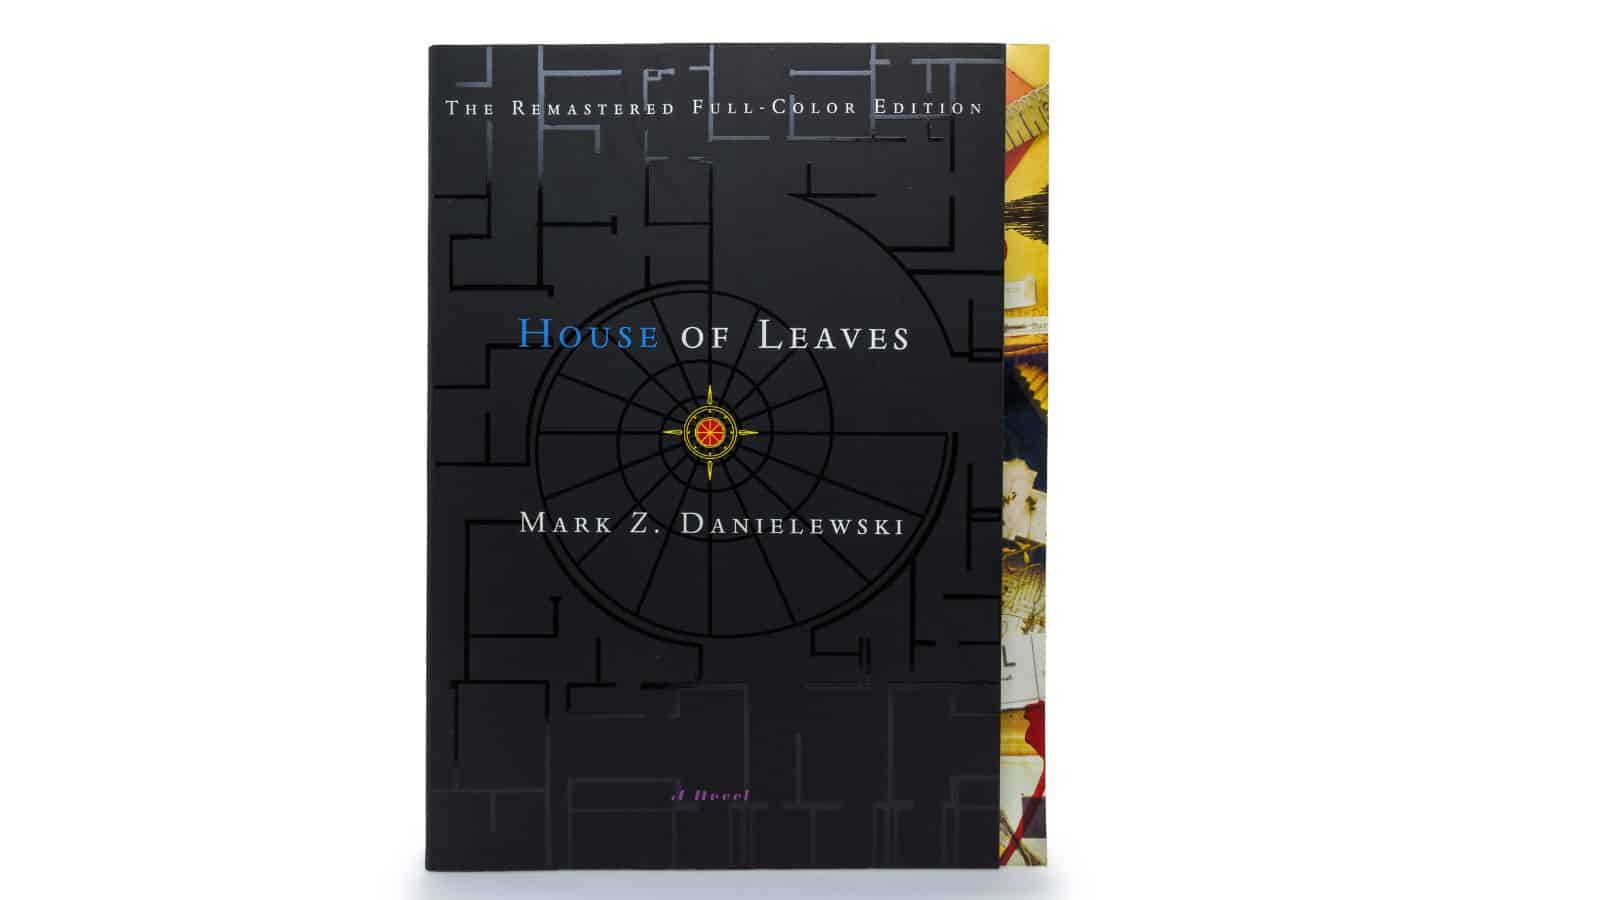 <p>Explore the complex depths of Danielewski’s imagination, where graphical devices, connections, and links interact to form a truly fascinating book to read. The genre-bending look into insanity, obsession, and the boundaries of the story in “House of Leaves”.</p>